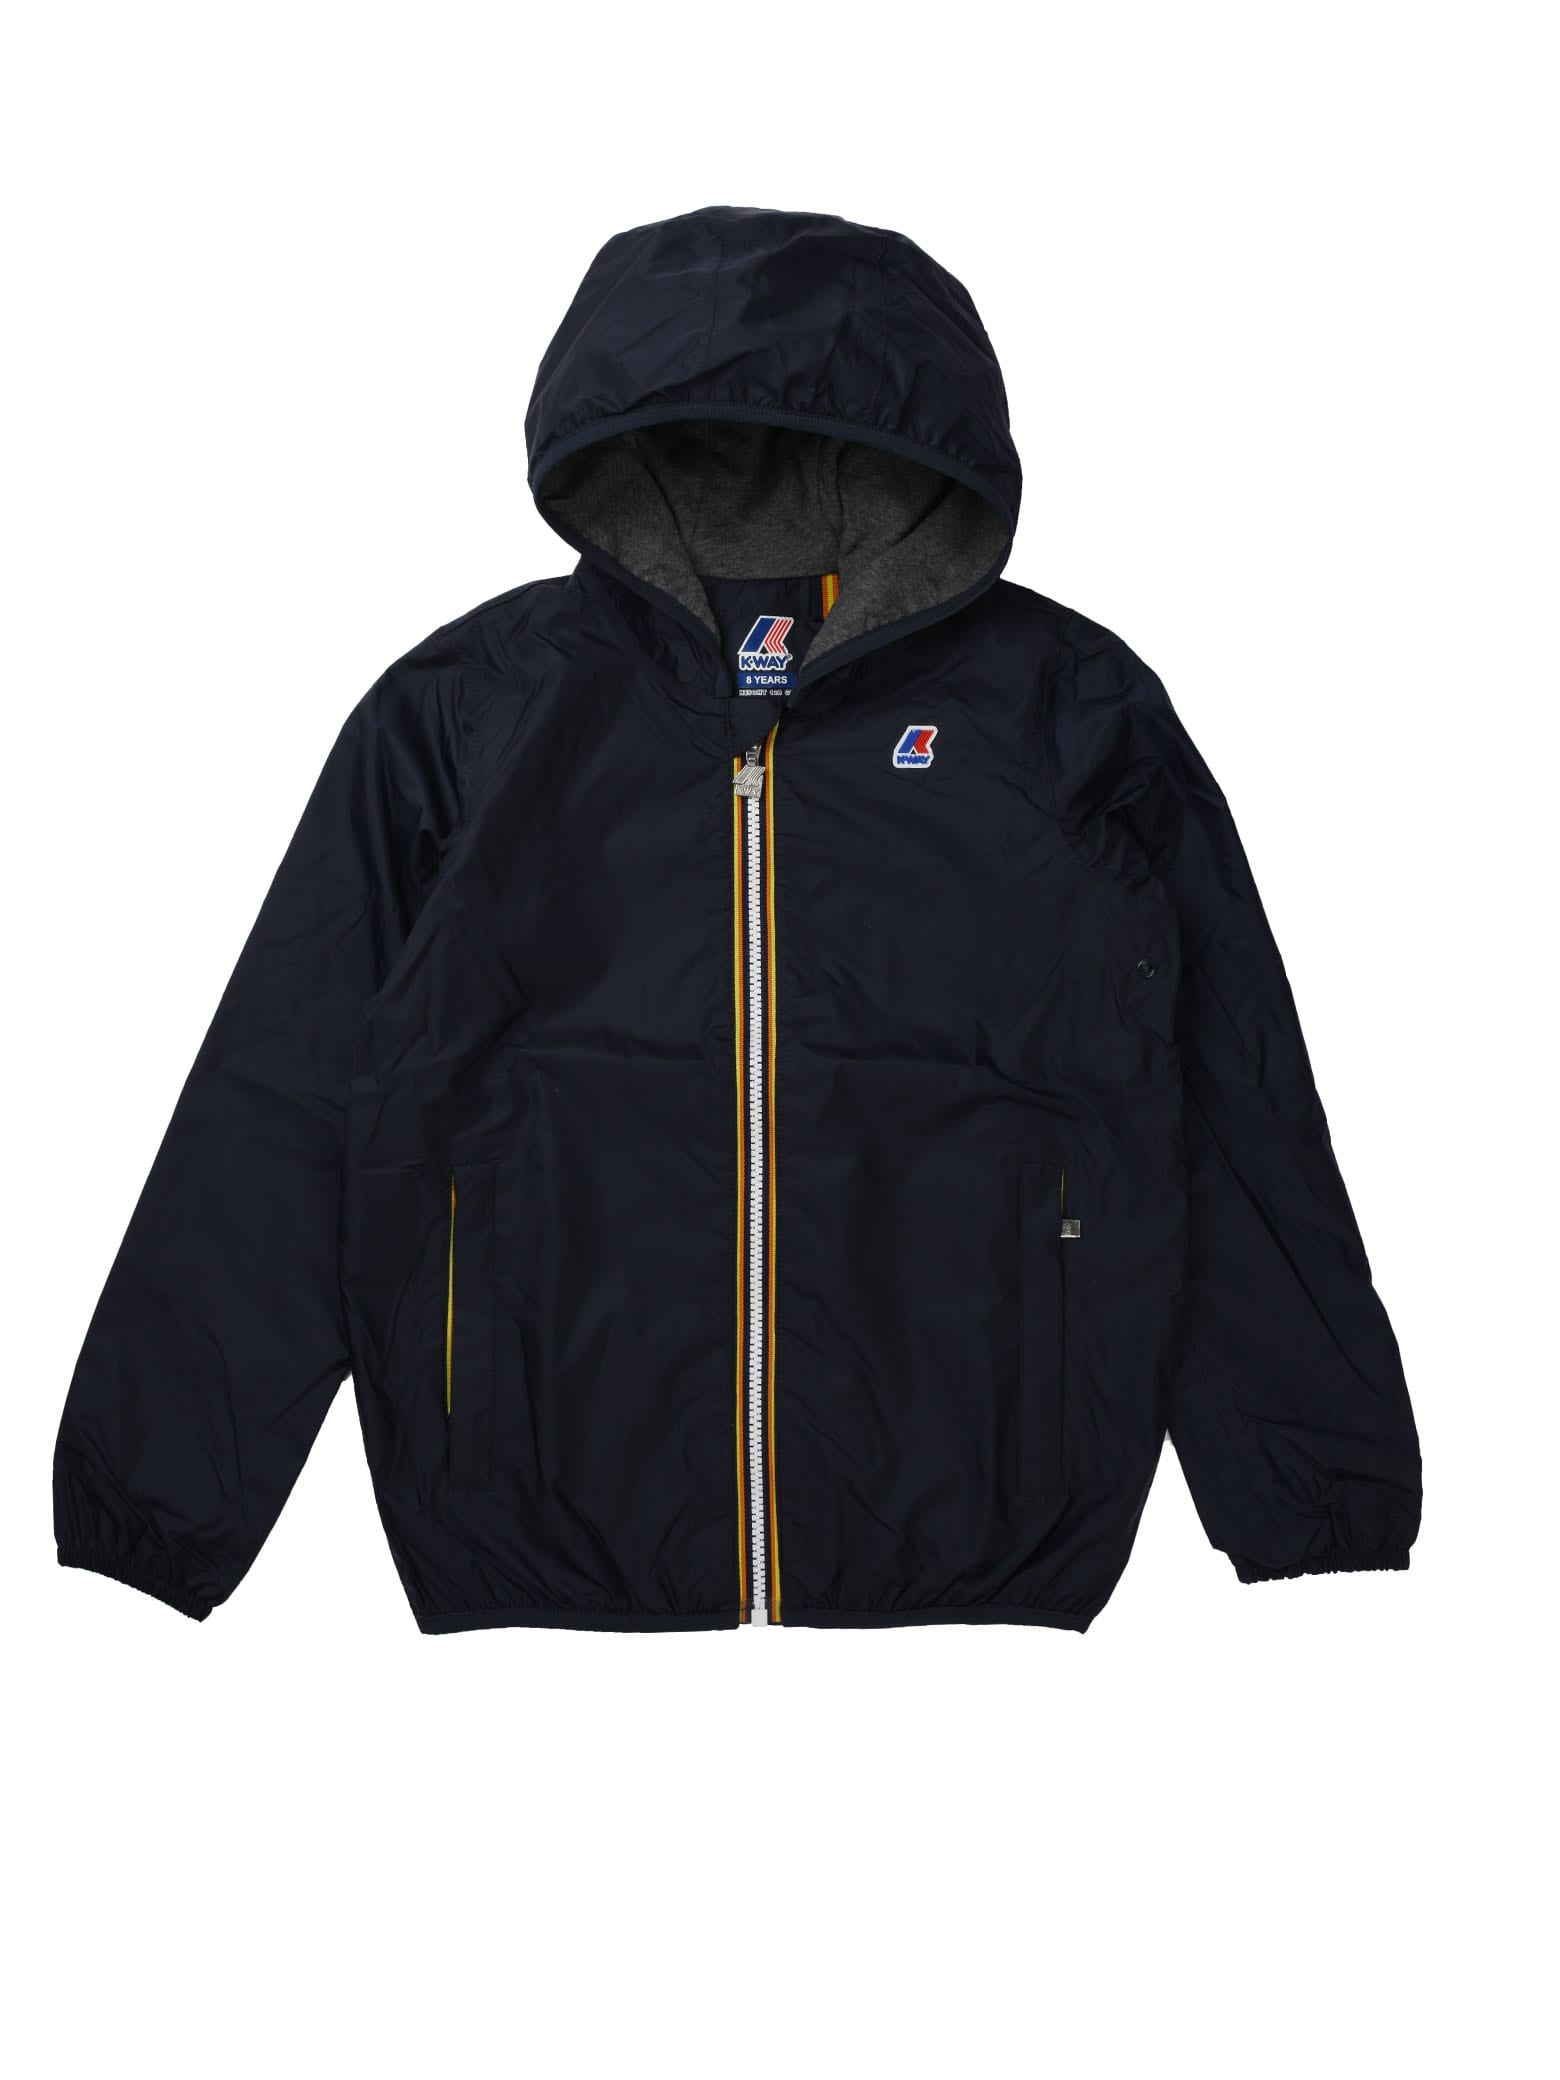 K-way Kids' Blue Jacket With Hood And Jersey